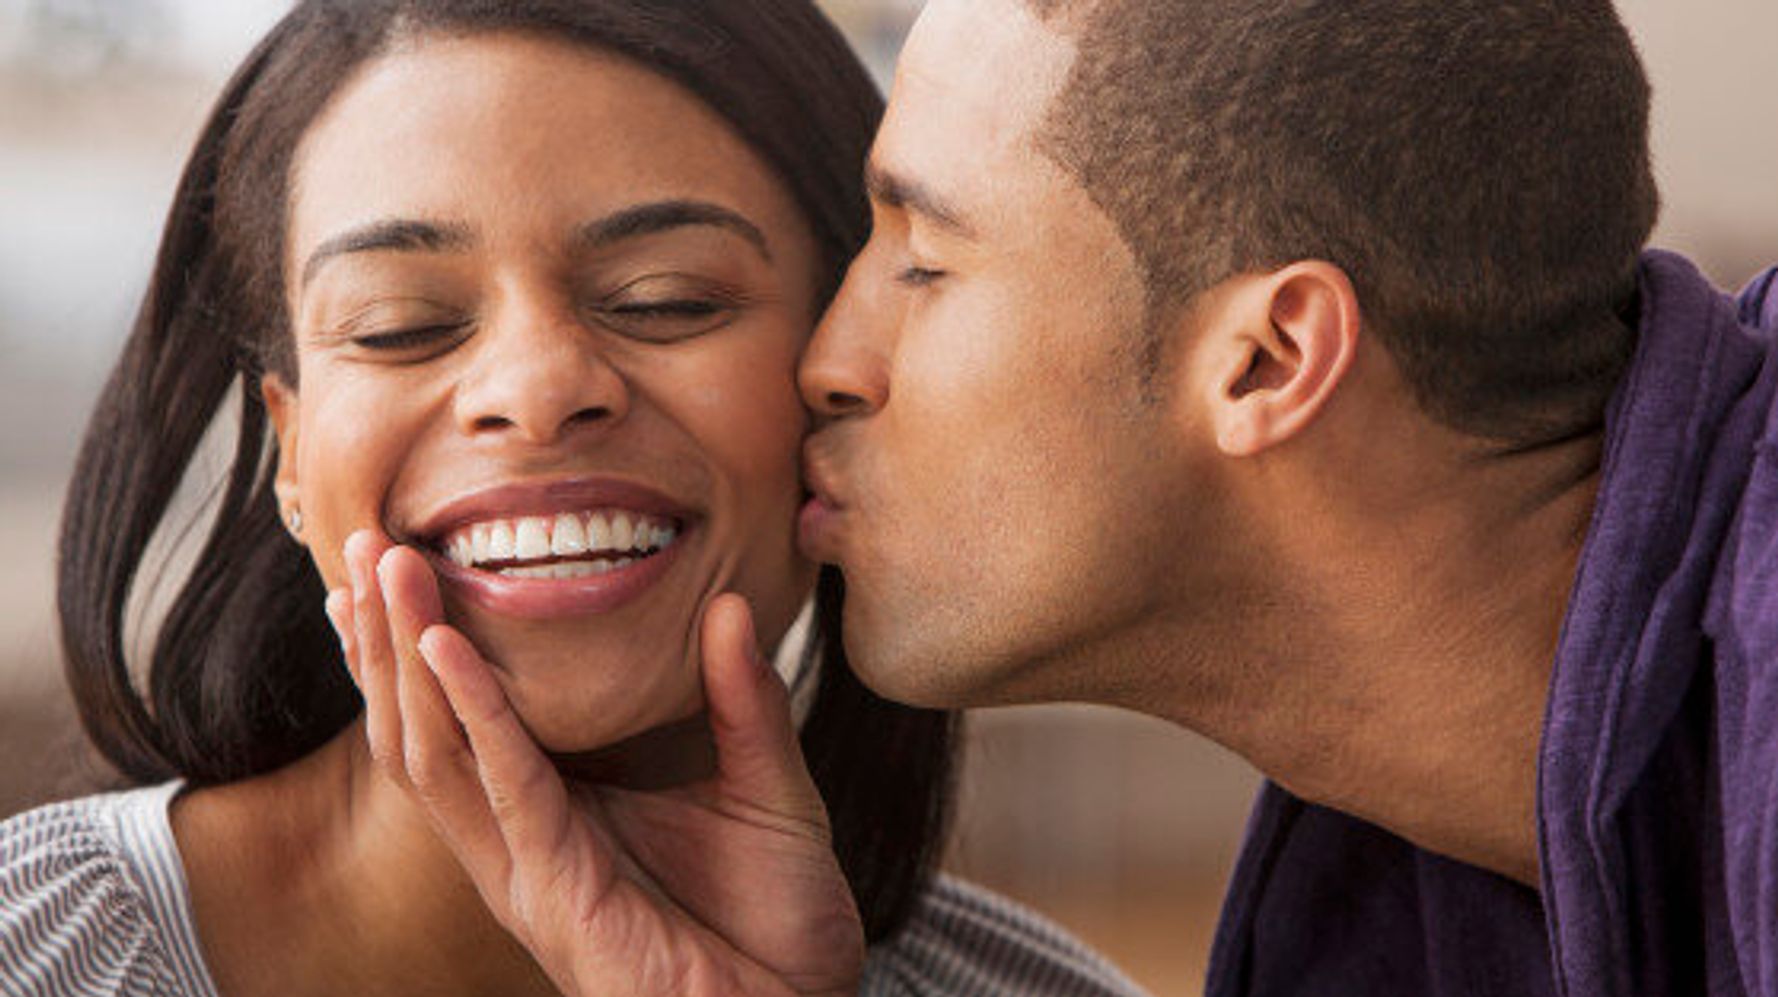 A Better Relationship 13 Things That Will Make Your Partner Feel